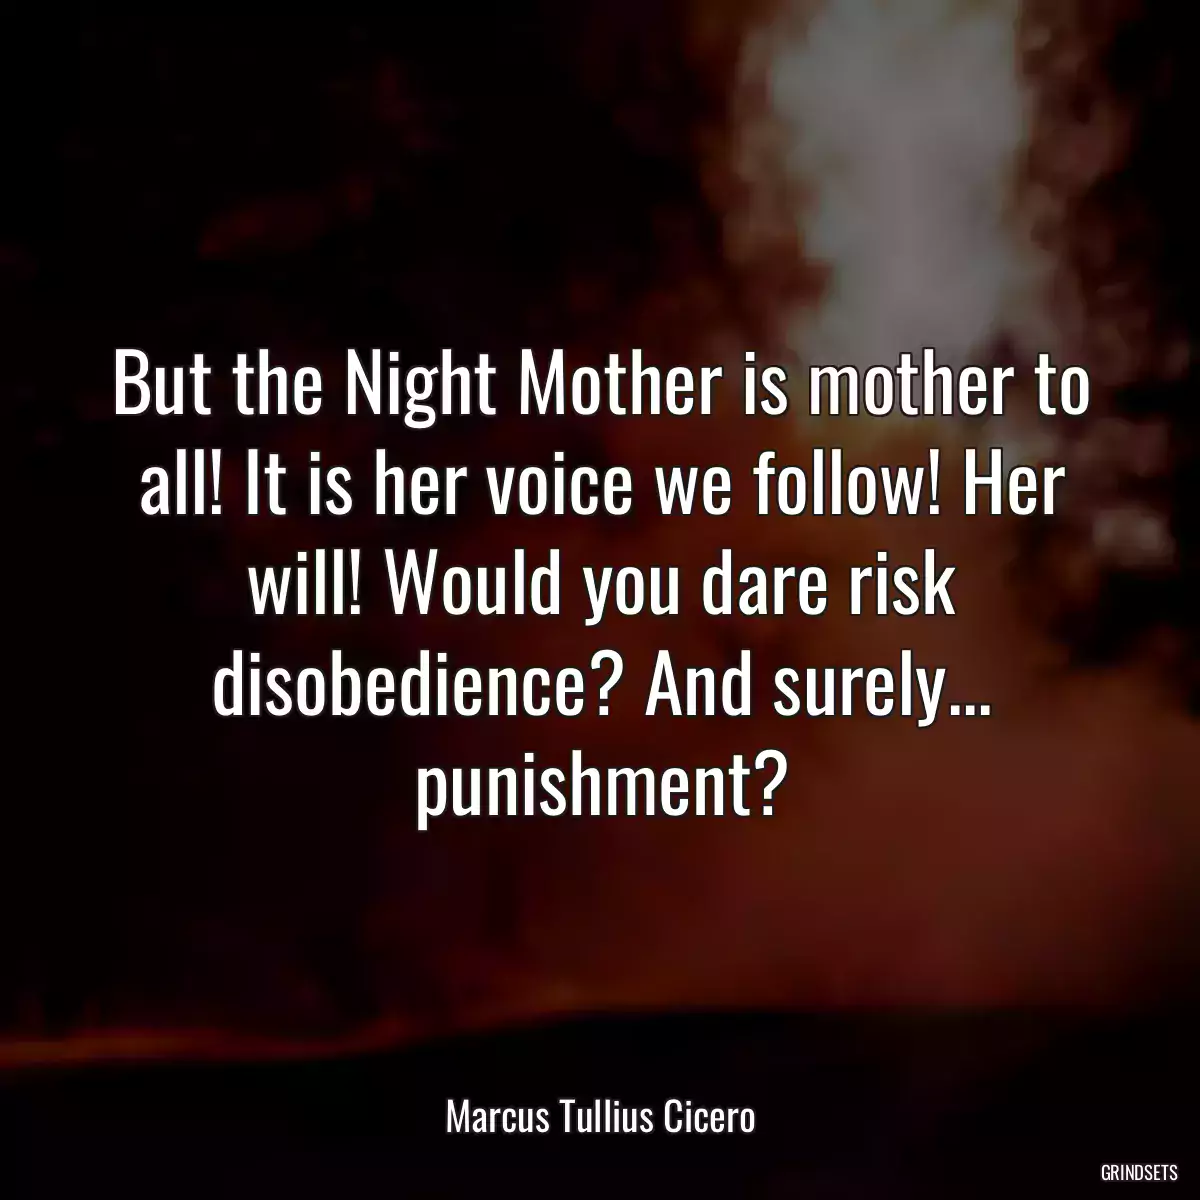 But the Night Mother is mother to all! It is her voice we follow! Her will! Would you dare risk disobedience? And surely... punishment?